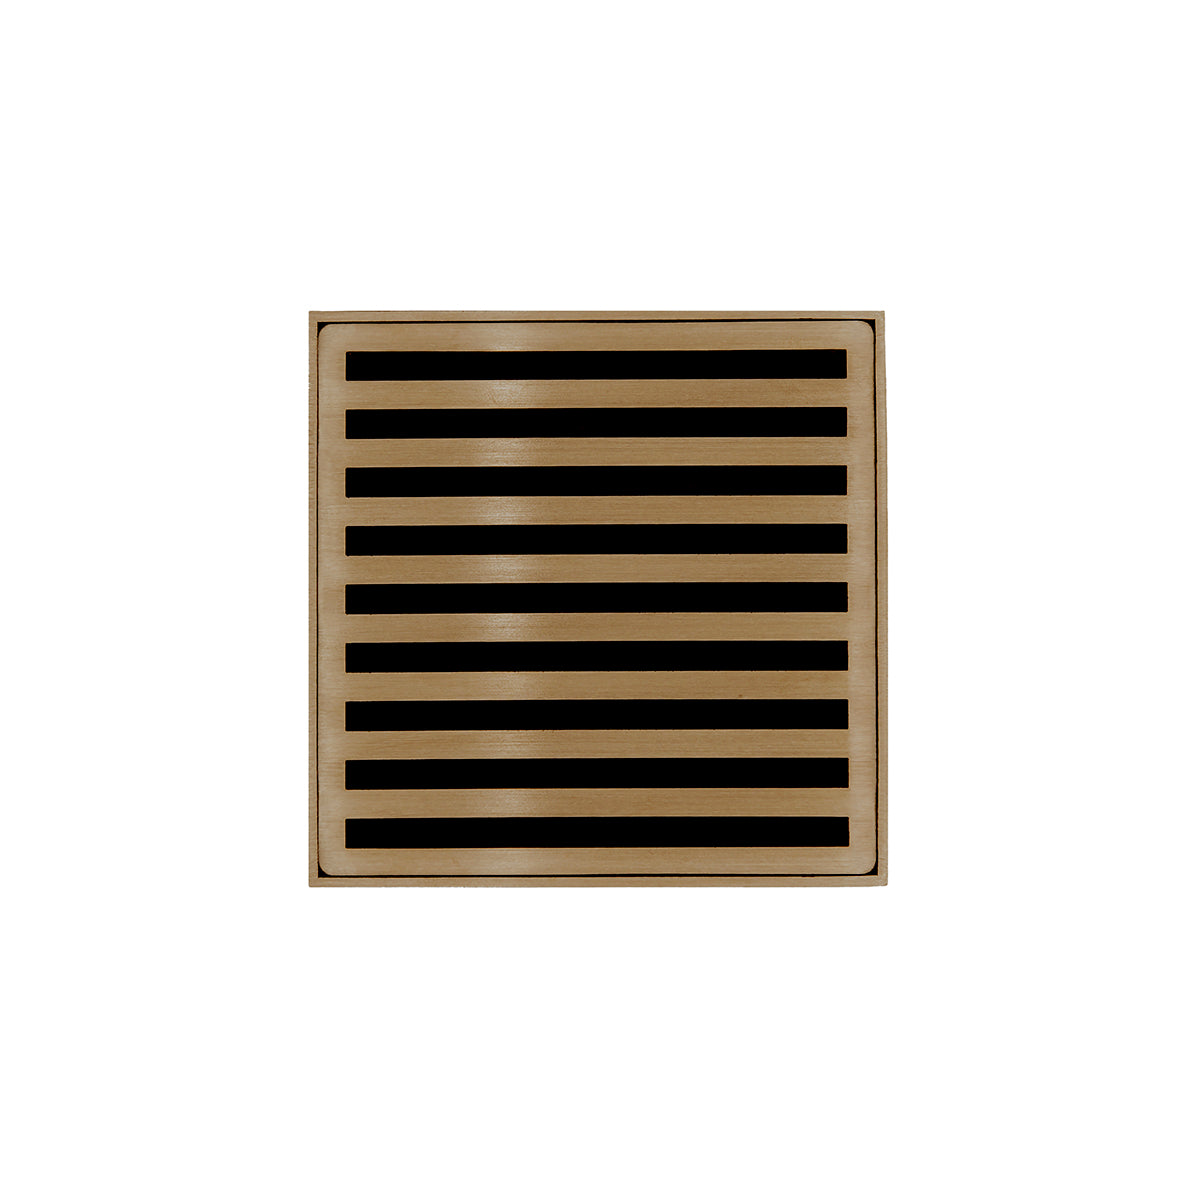 Infinity Drain 4" x 4" ND 4 Premium Center Drain Kit with Lines Pattern Decorative Plate with ABS Drain Body, 2" Outlet